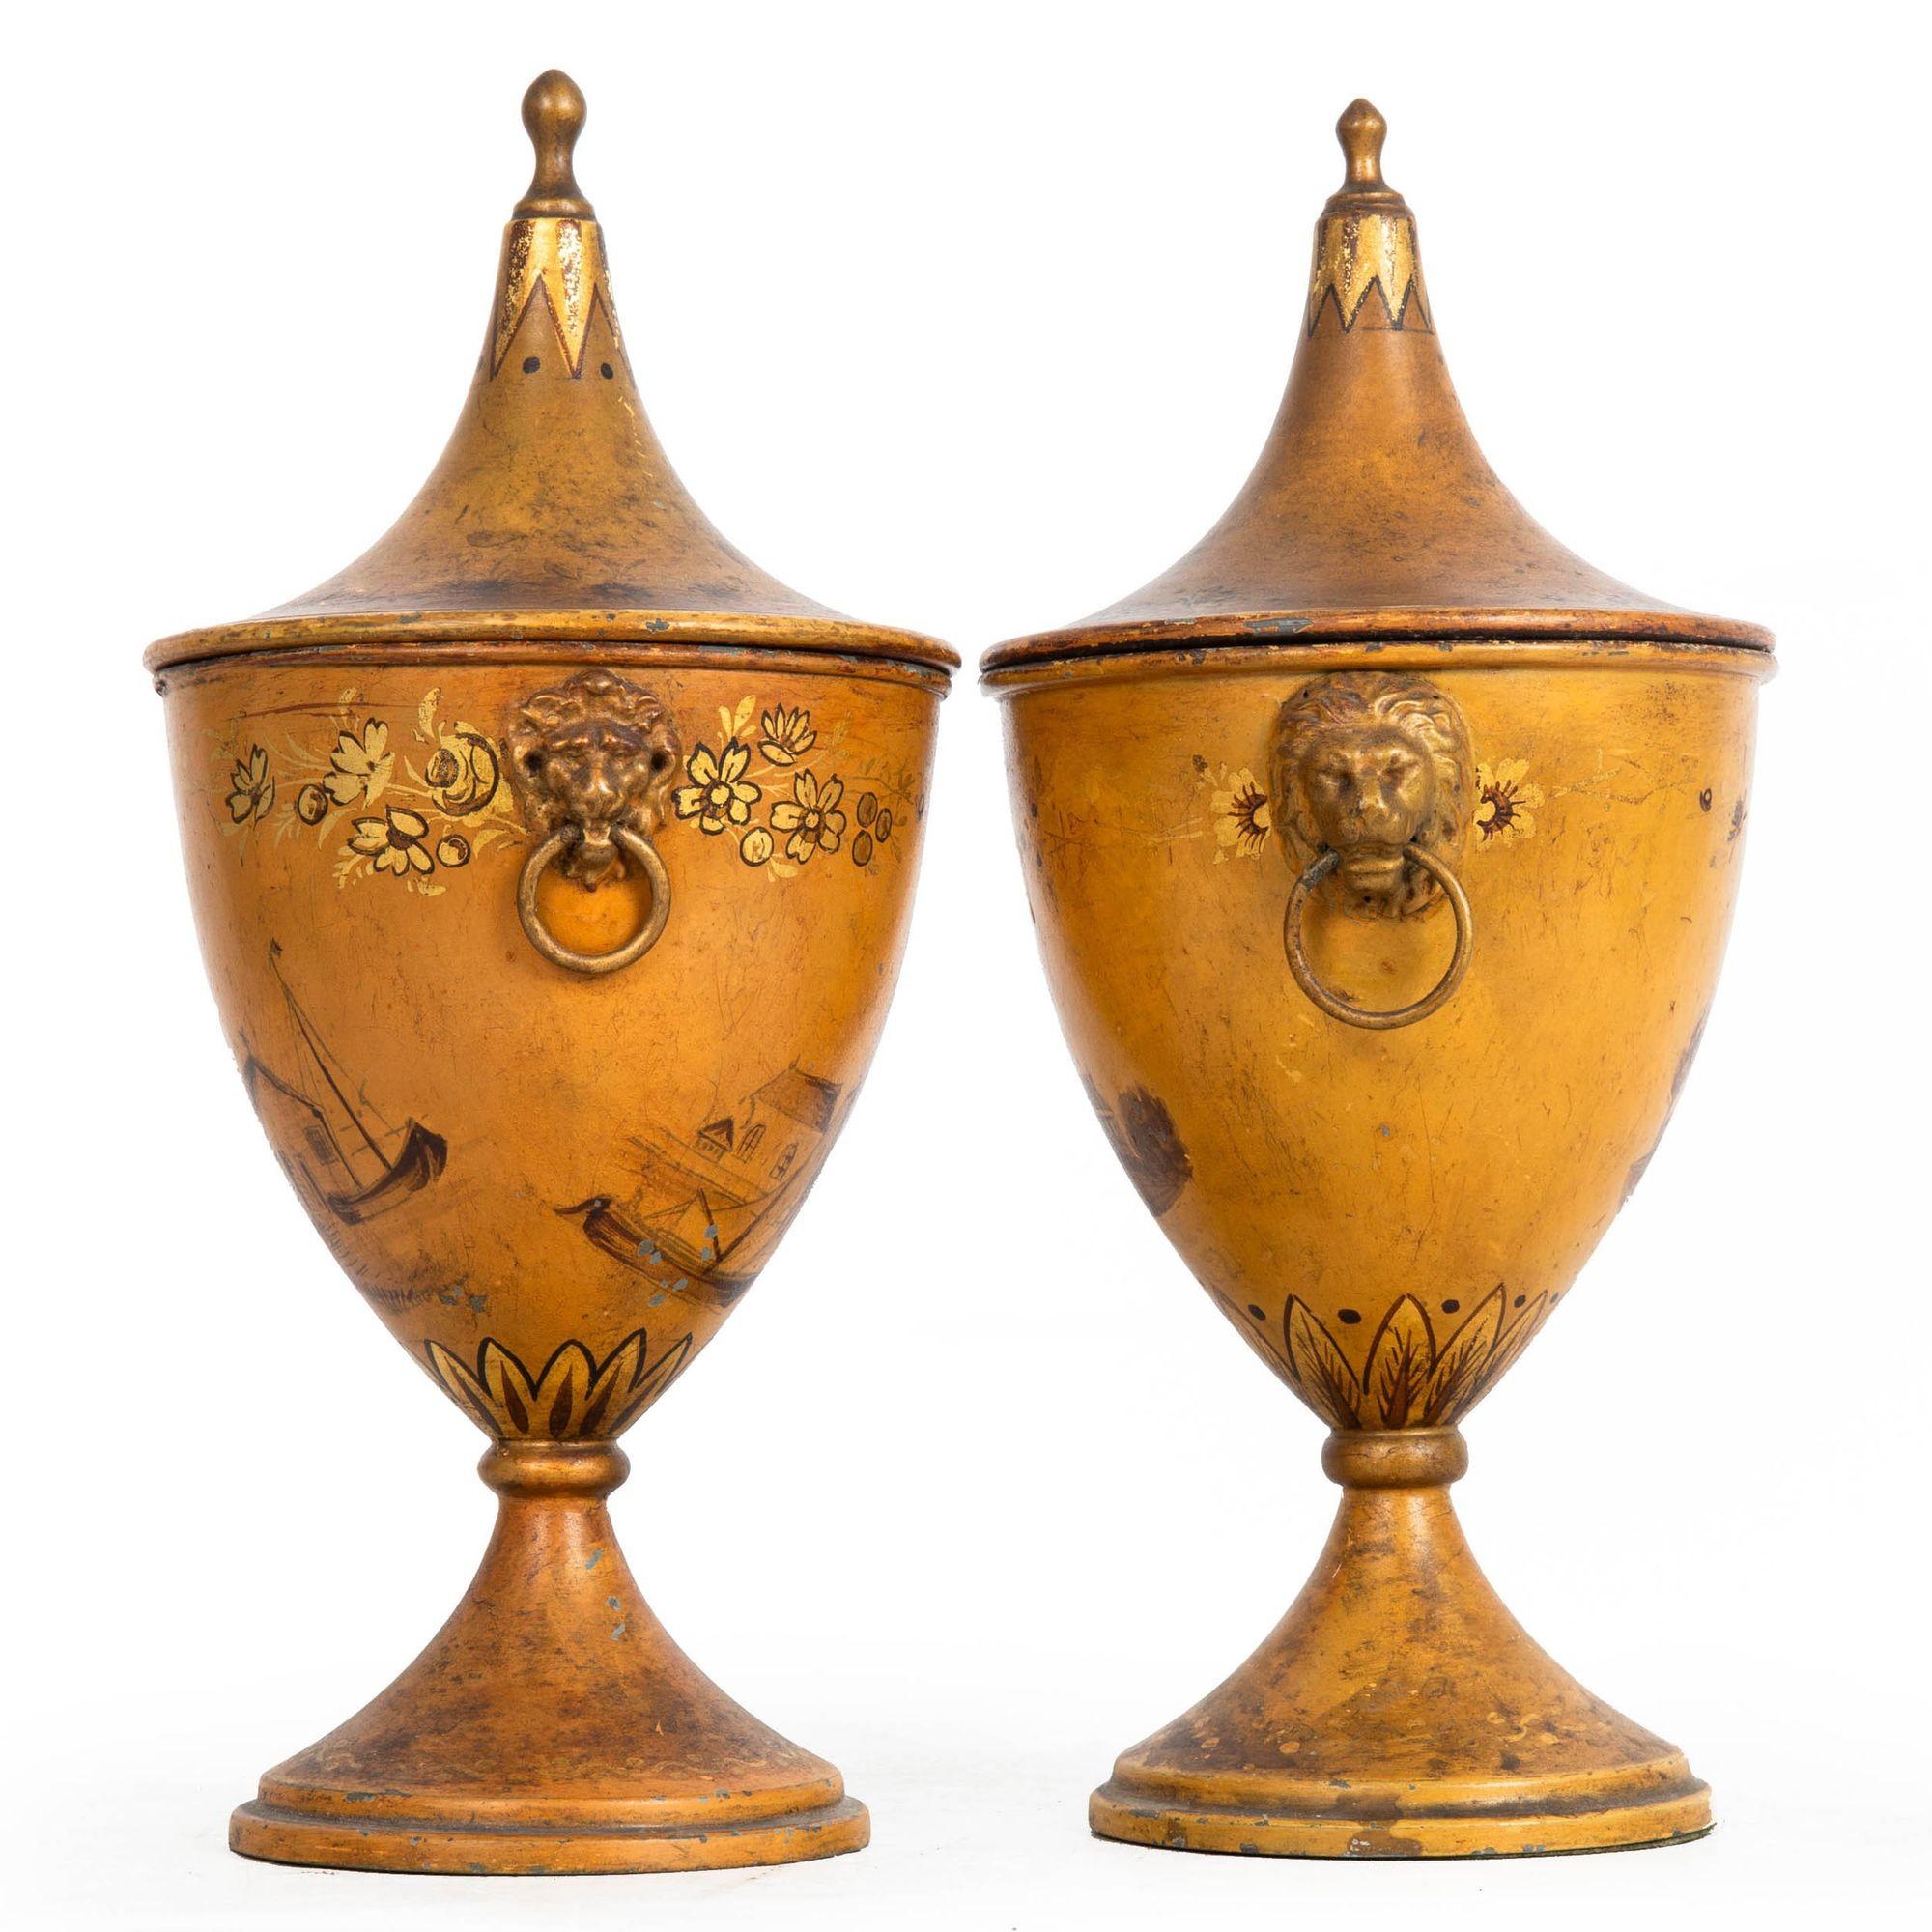 European Fine 19th Century Near-Pair of Regency Tole-Painted Chestnut Urns For Sale